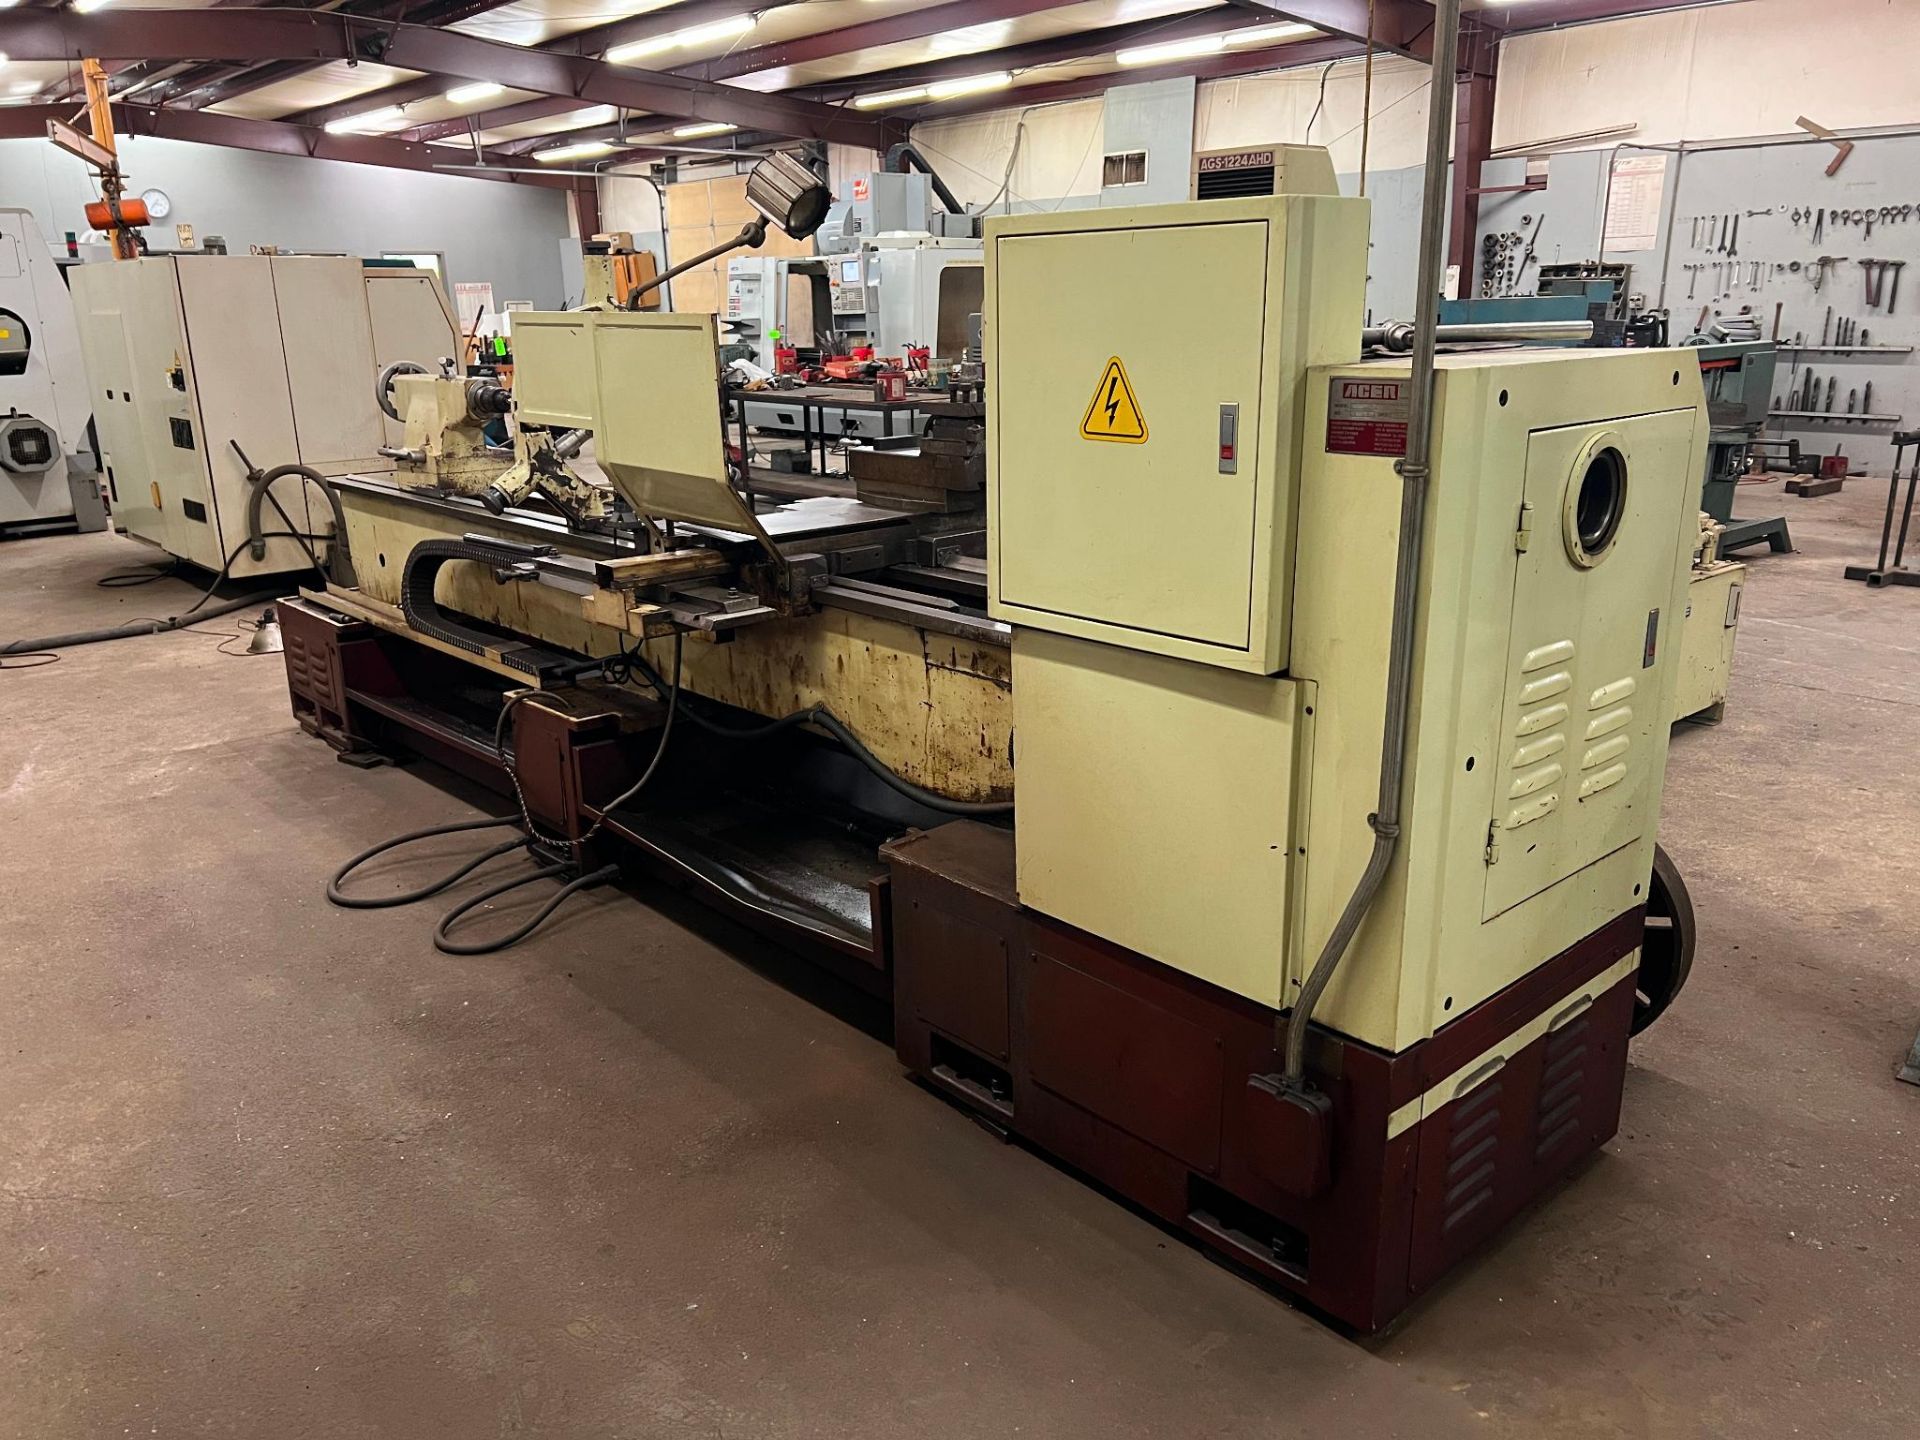 1999 Acer 24120G Gap Bed Engine Lathe Serial Number: 99010102. Distance Between Centers: 21.5" x 118 - Image 7 of 24